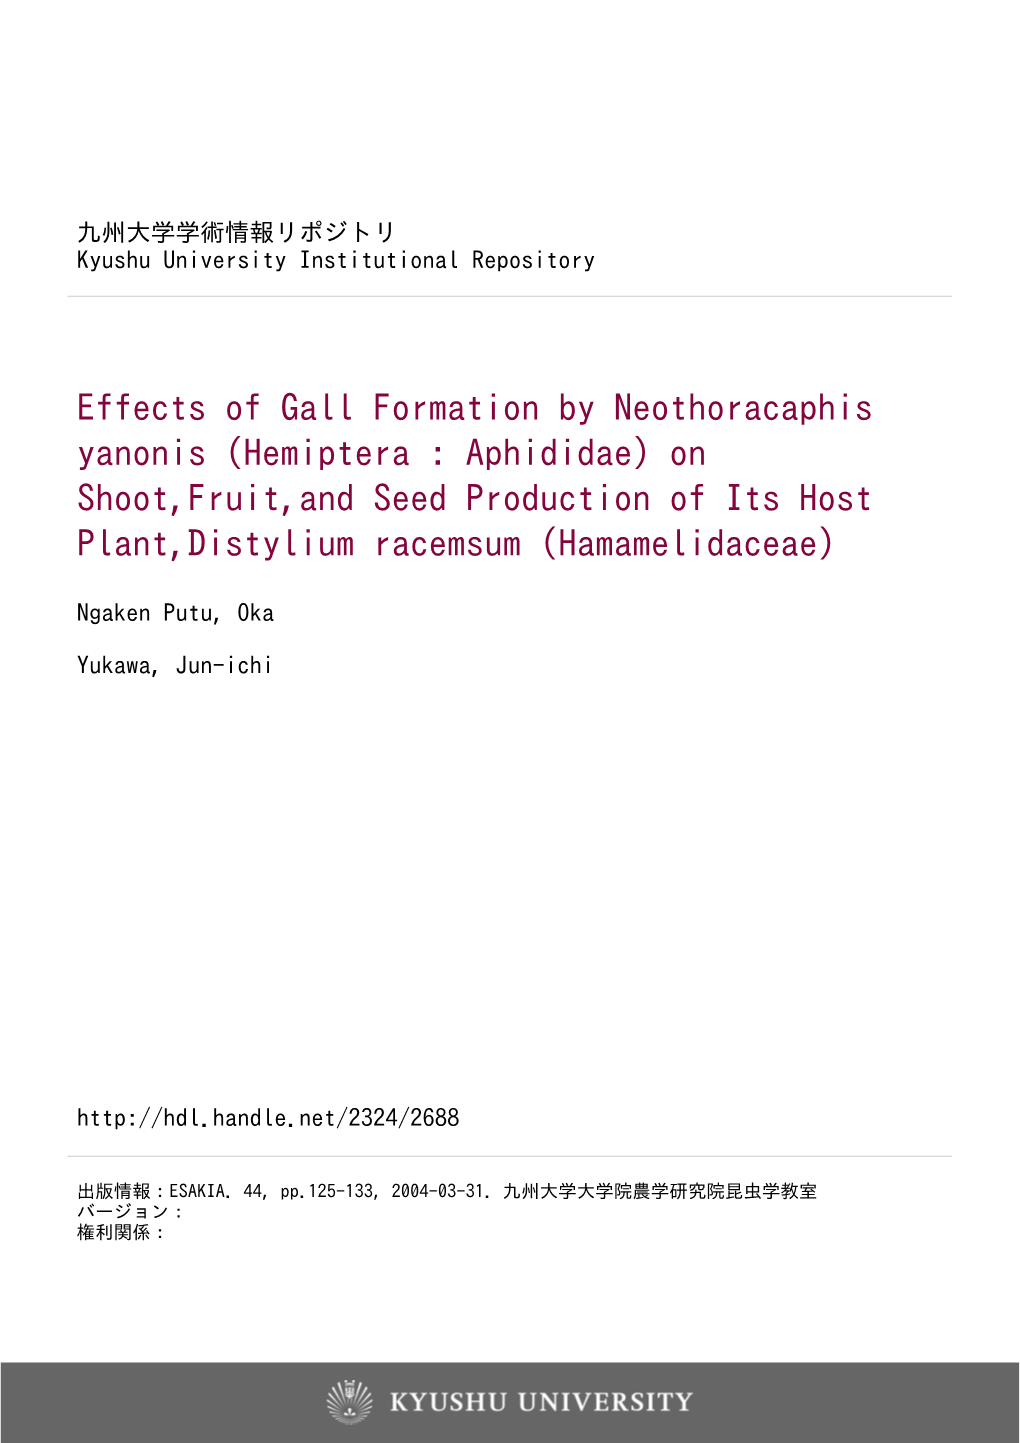 Effects of Gall Formation by Neothoracaphis Yanonis (Hemiptera : Aphididae) on Shoot,Fruit,And Seed Production of Its Host Plant,Distylium Racemsum (Hamamelidaceae)